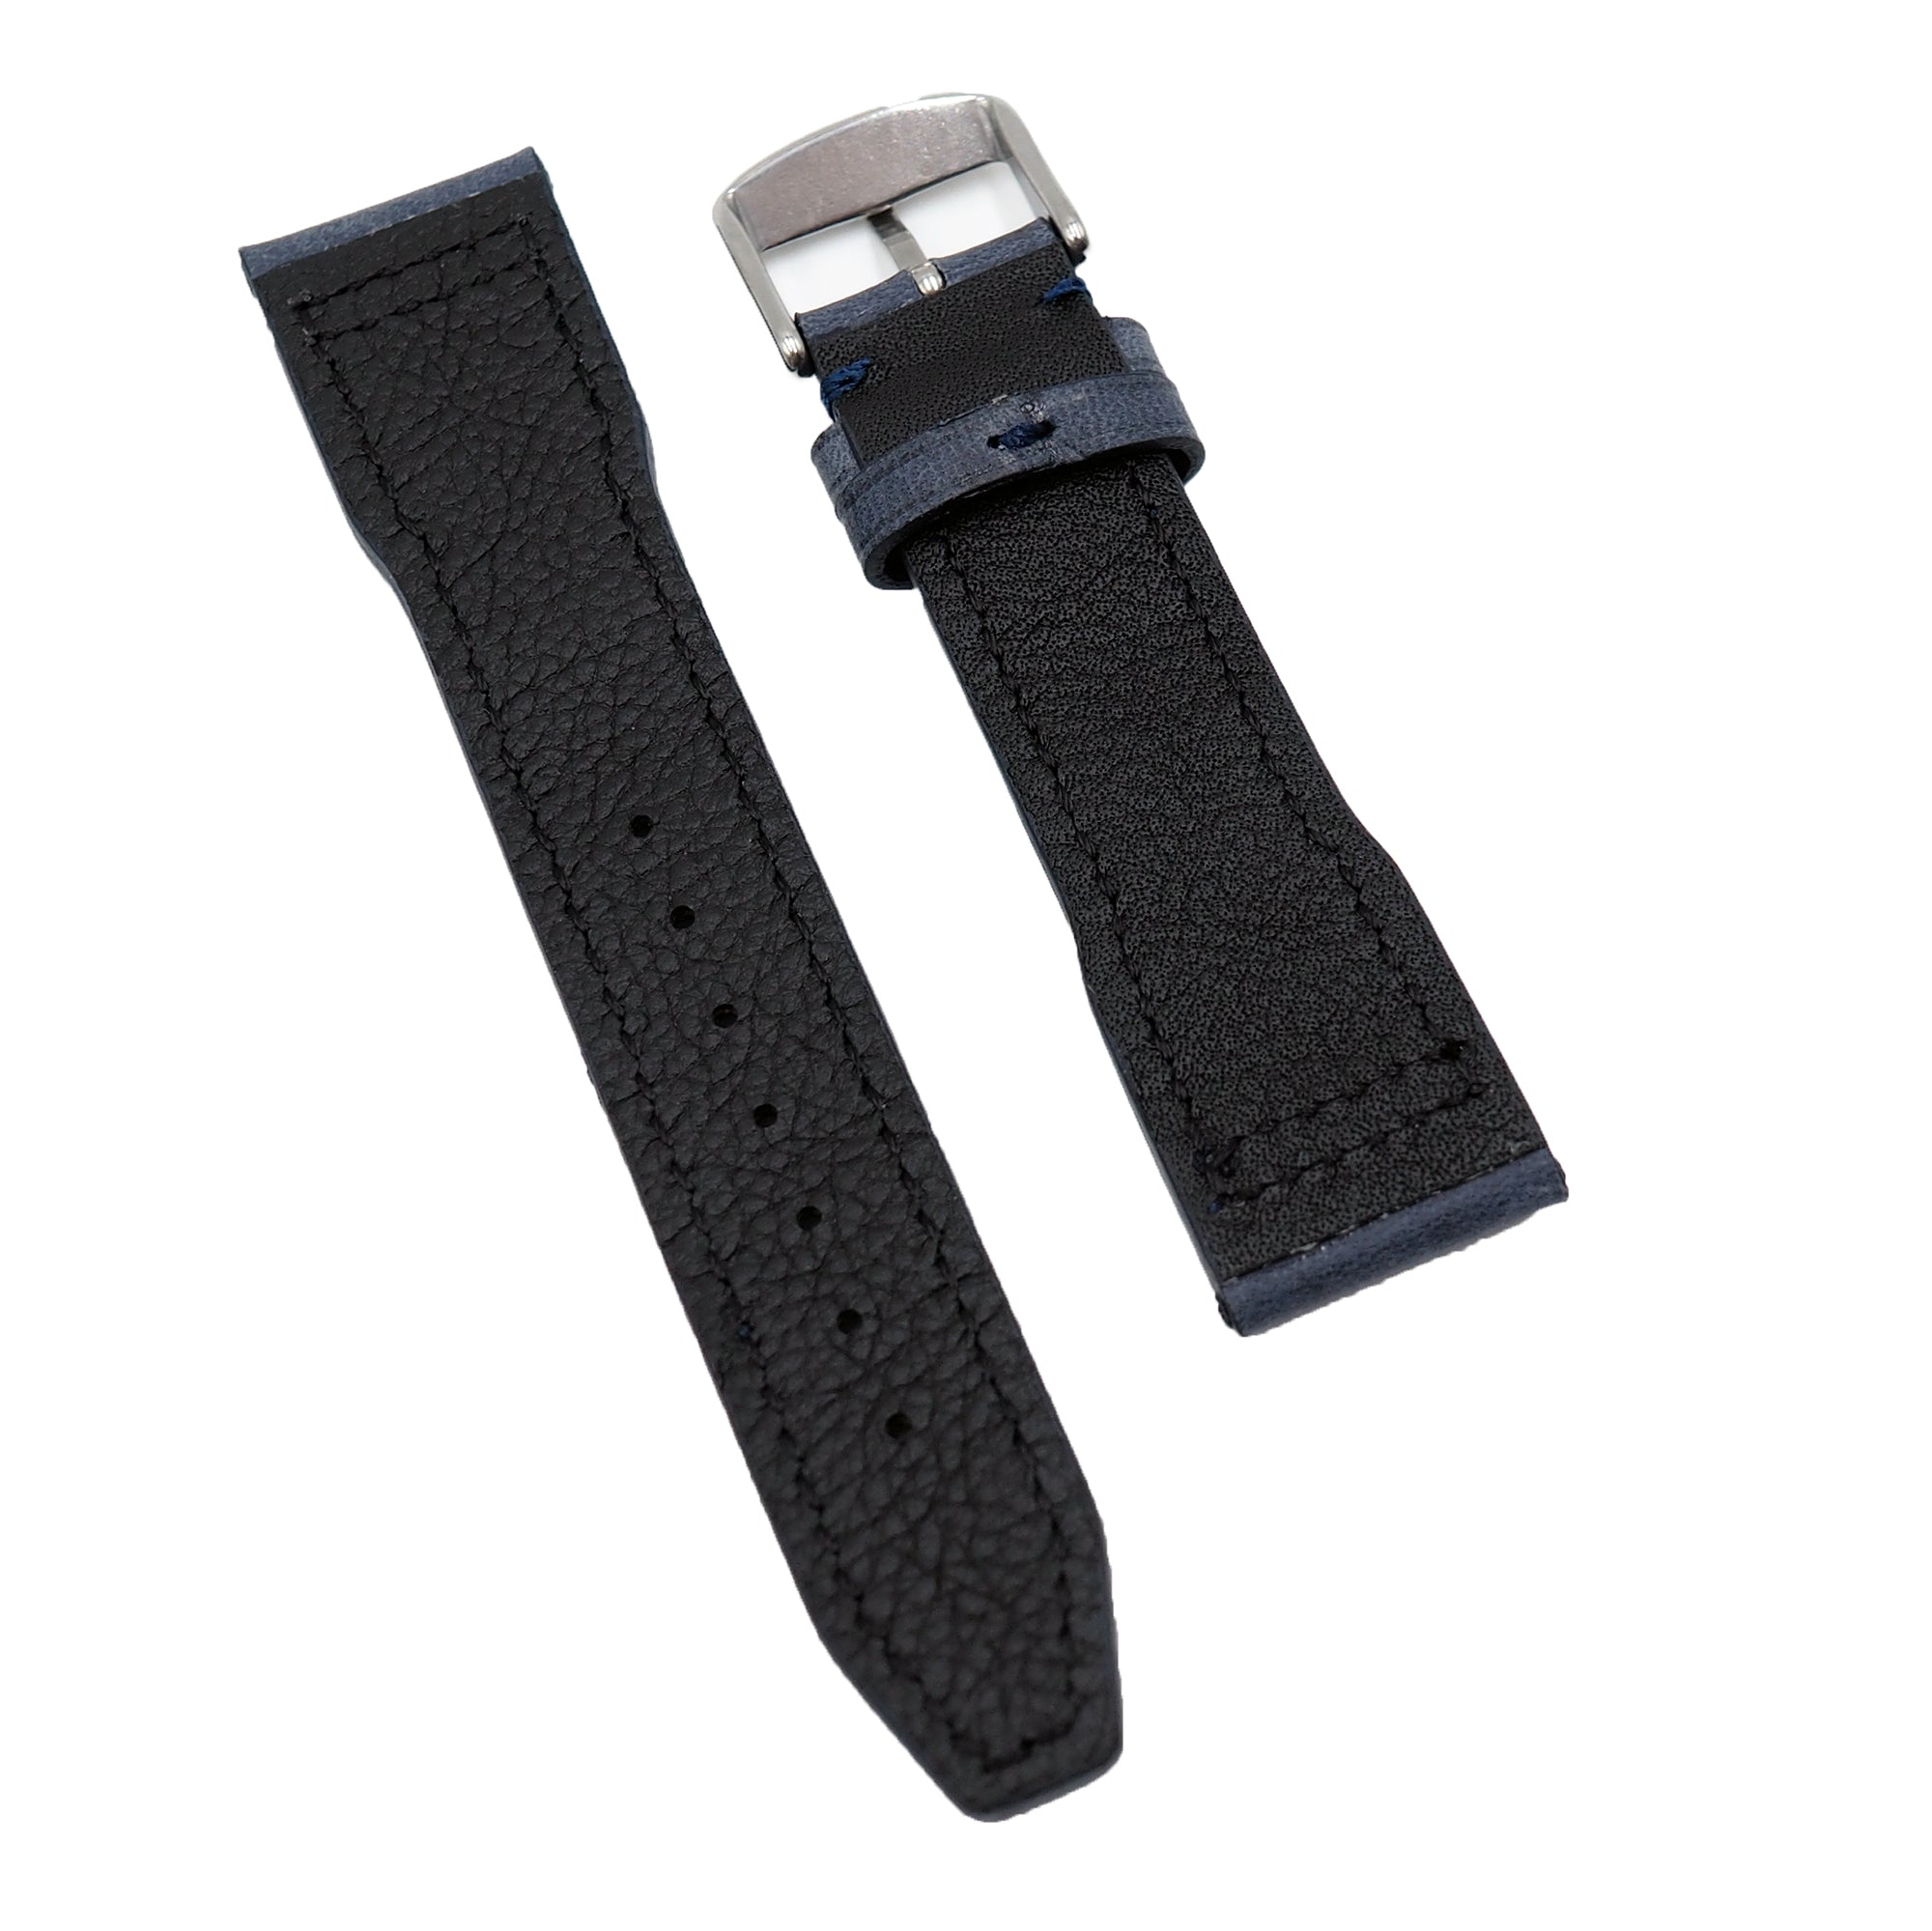 Revival Strap 21mm Pilot Style Blue Ostrich Leather Watch Strap for IWC, Semi Square Tail